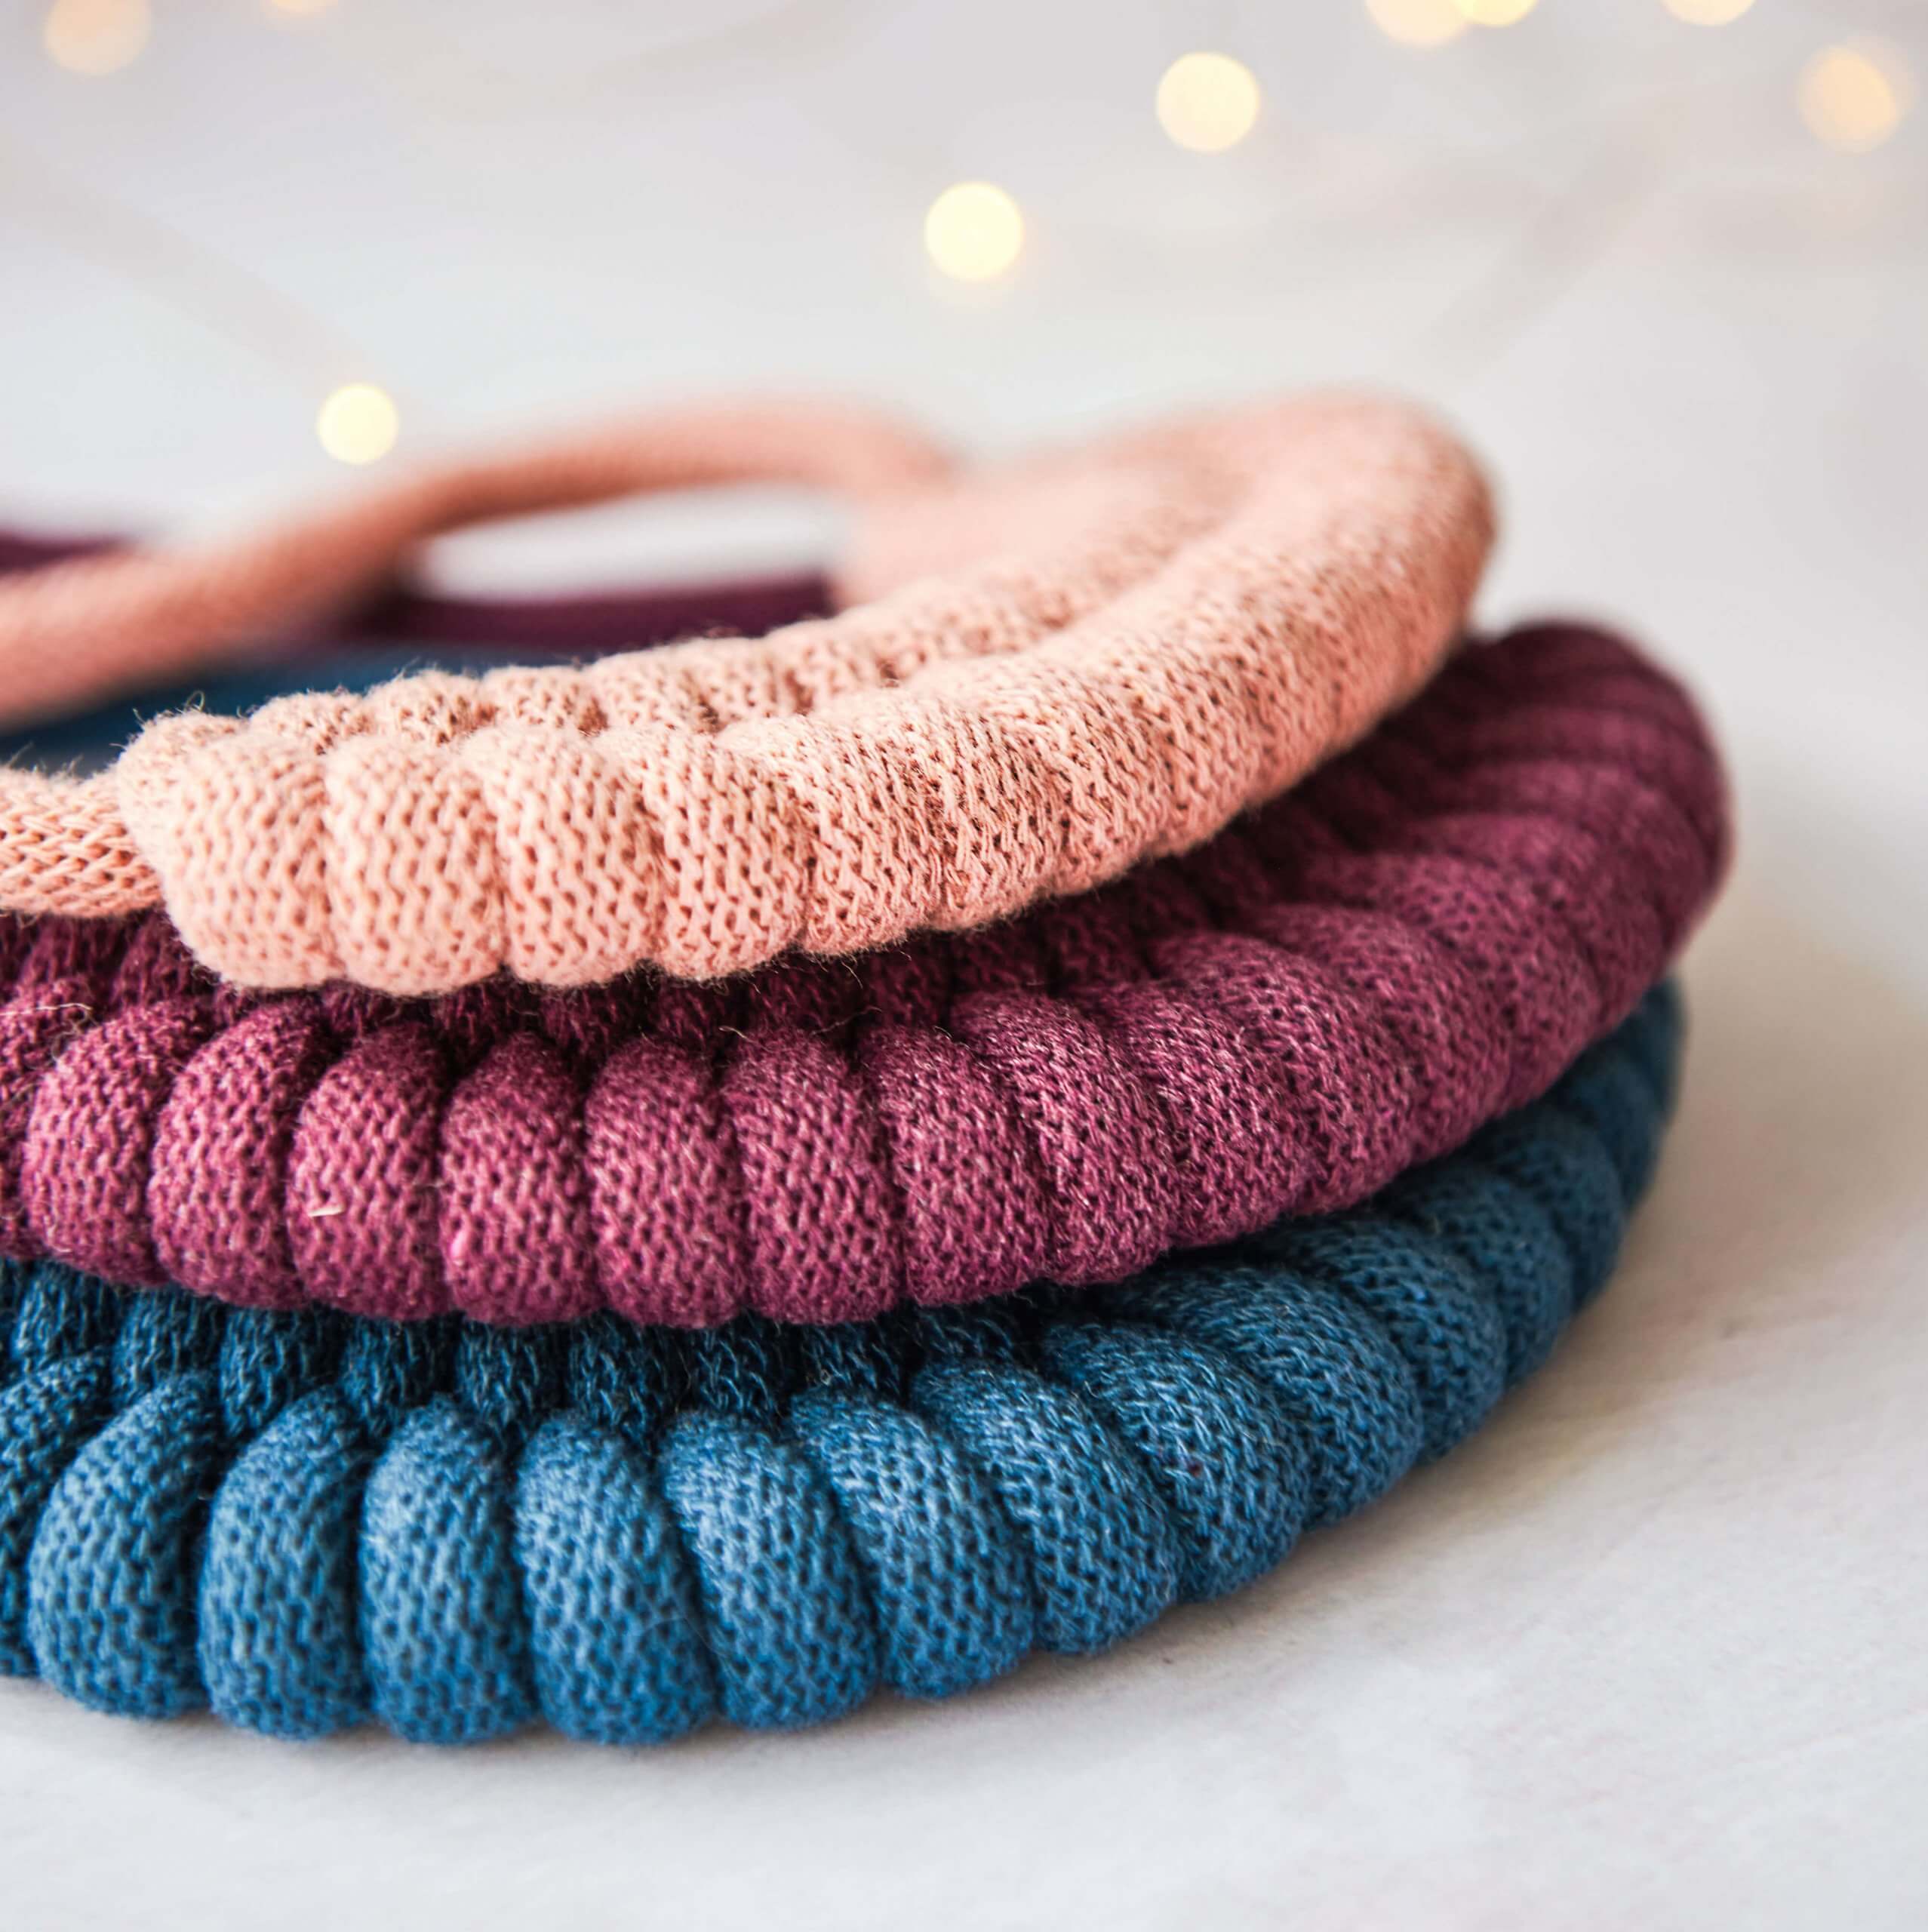 Chunky Woven Necklace Kit